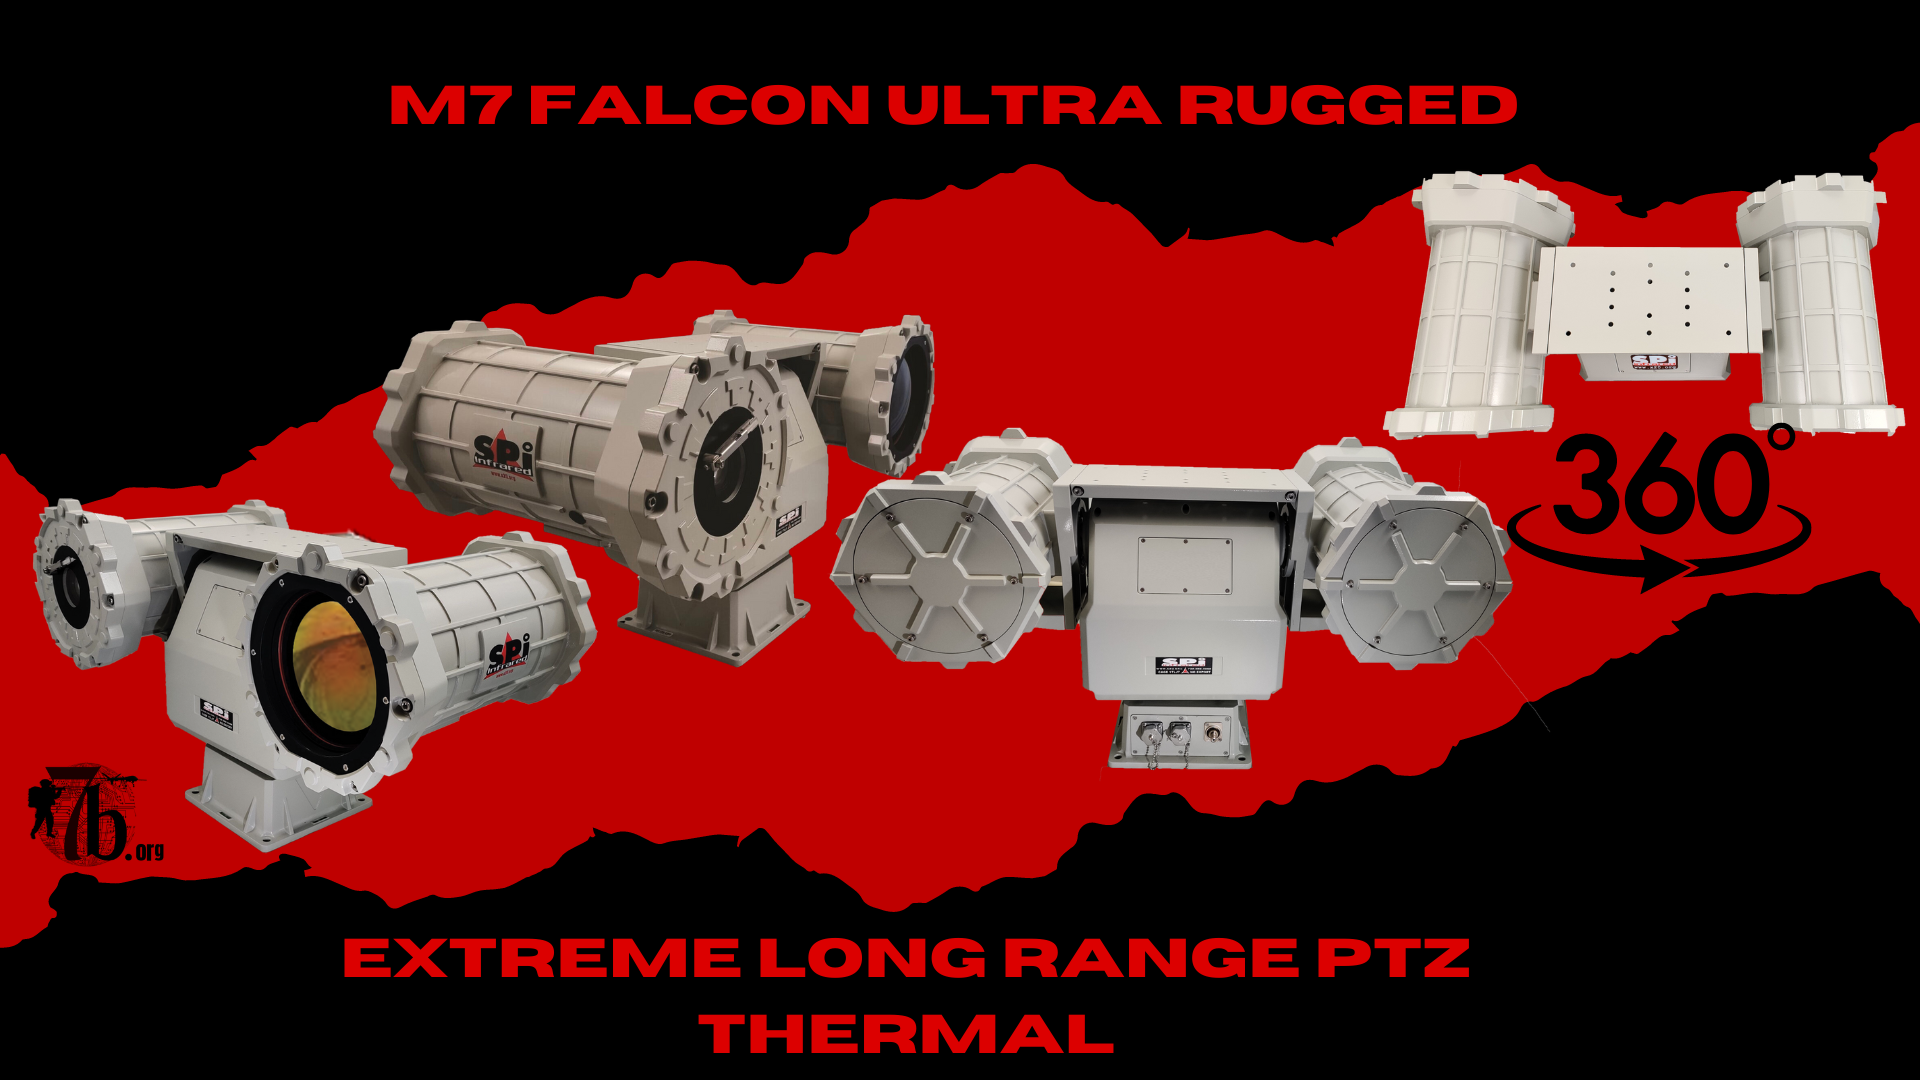 the m7 falcon is a high-performance, multi-purpose, ultra long-range, thermal imaging flir ptz camera with unique sensors.